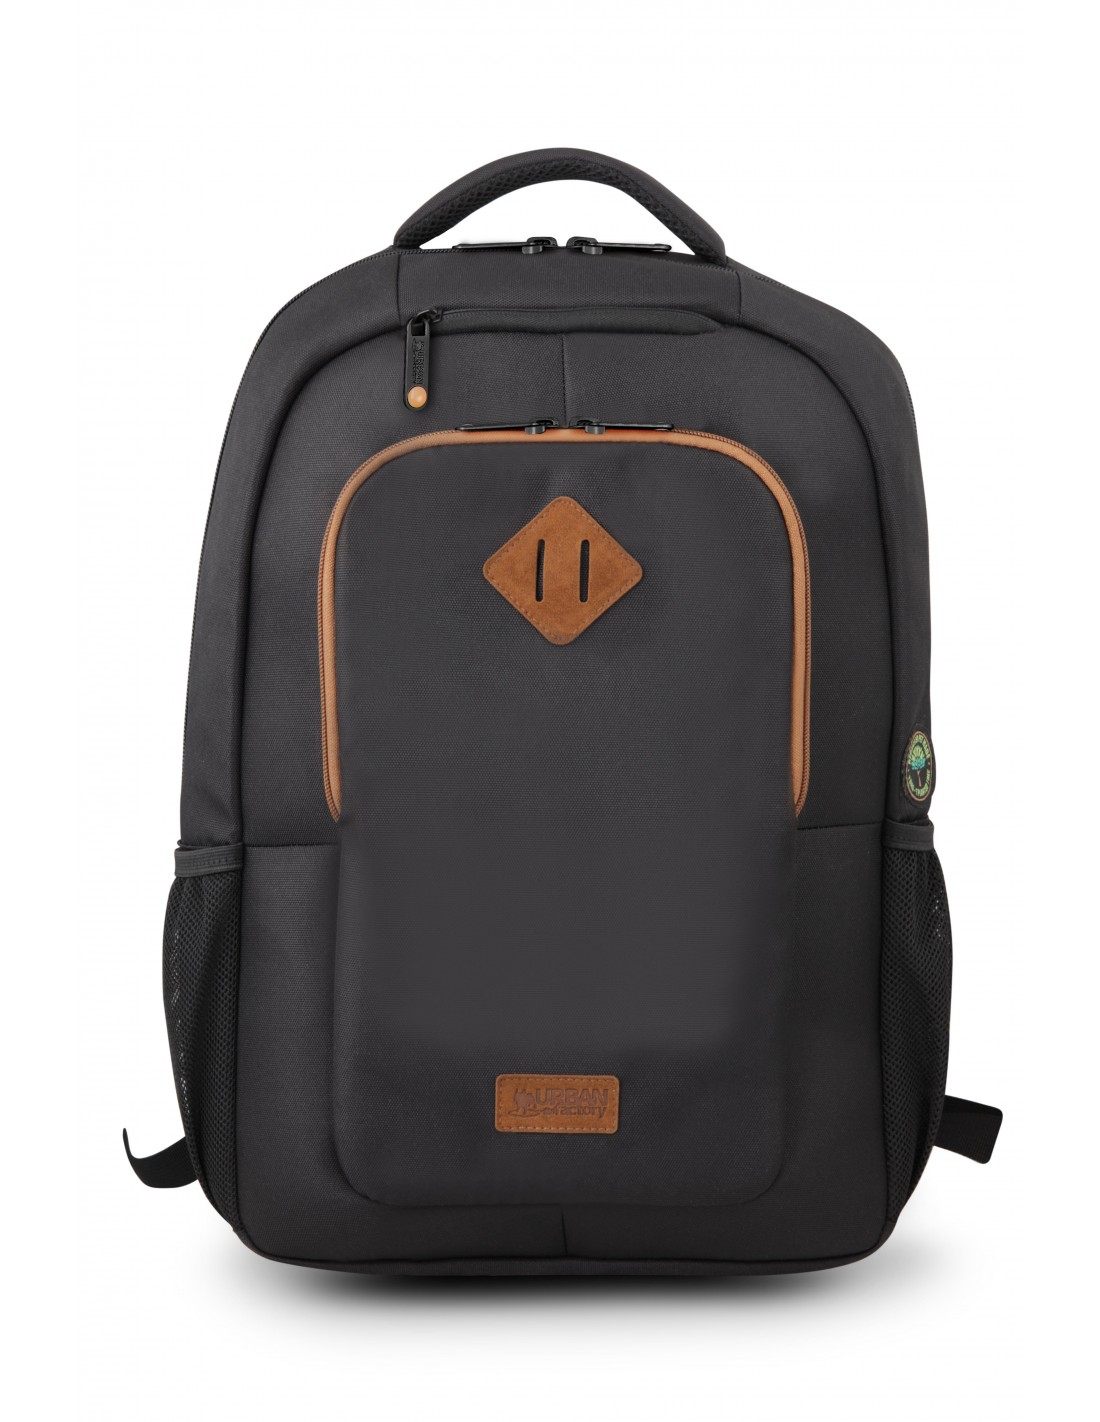 CYCLEE ECOLOGIC TOPLOADING BACKPACK FOR NOTEBOOK 15.6"